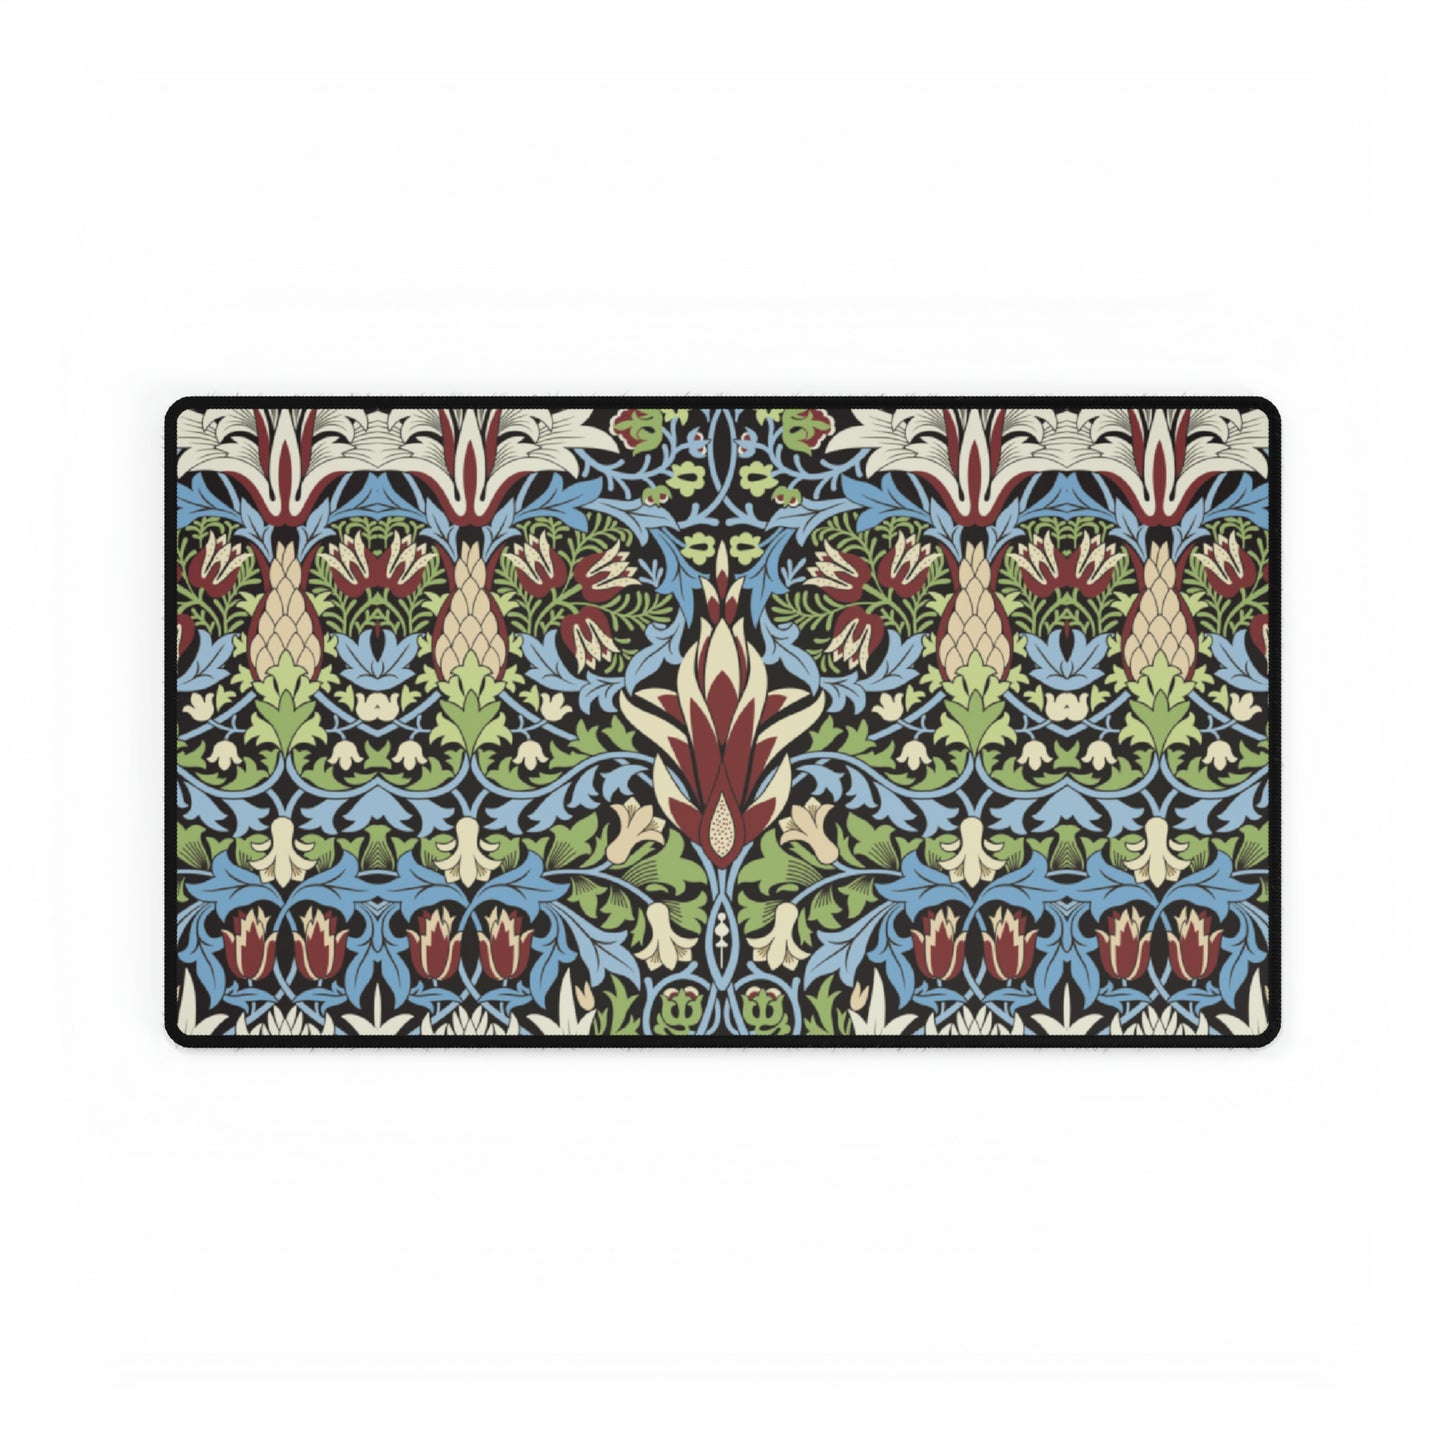 william-morris-co-desk-mat-snakeshead-collection-11